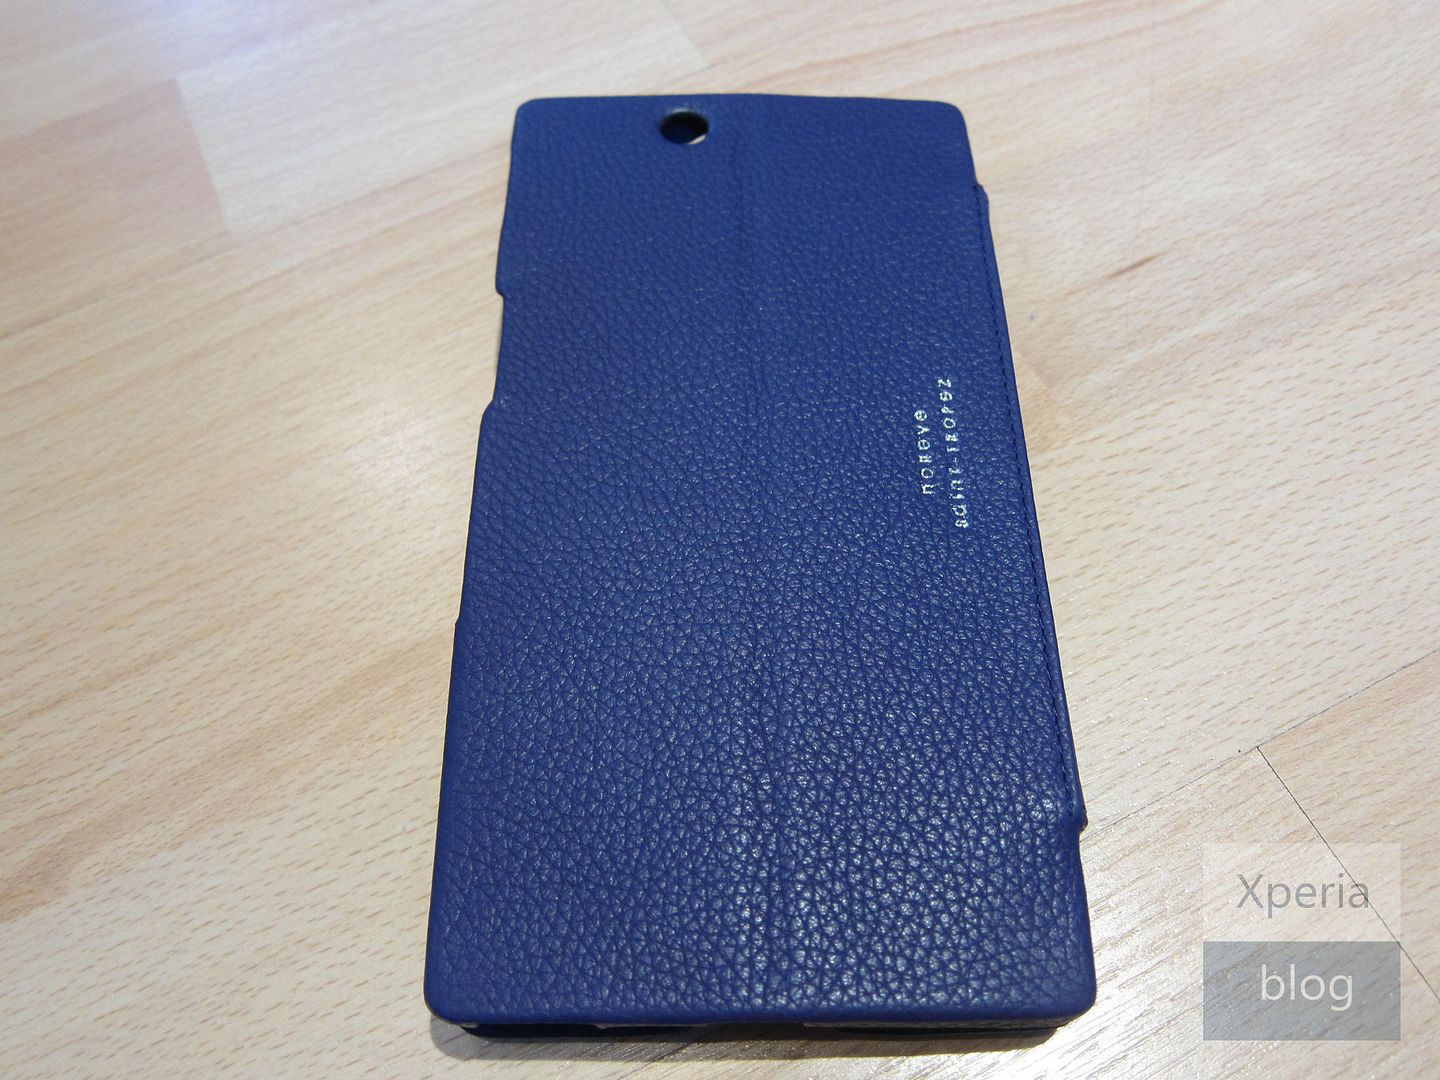 Noreve Xperia Z Ultra case review